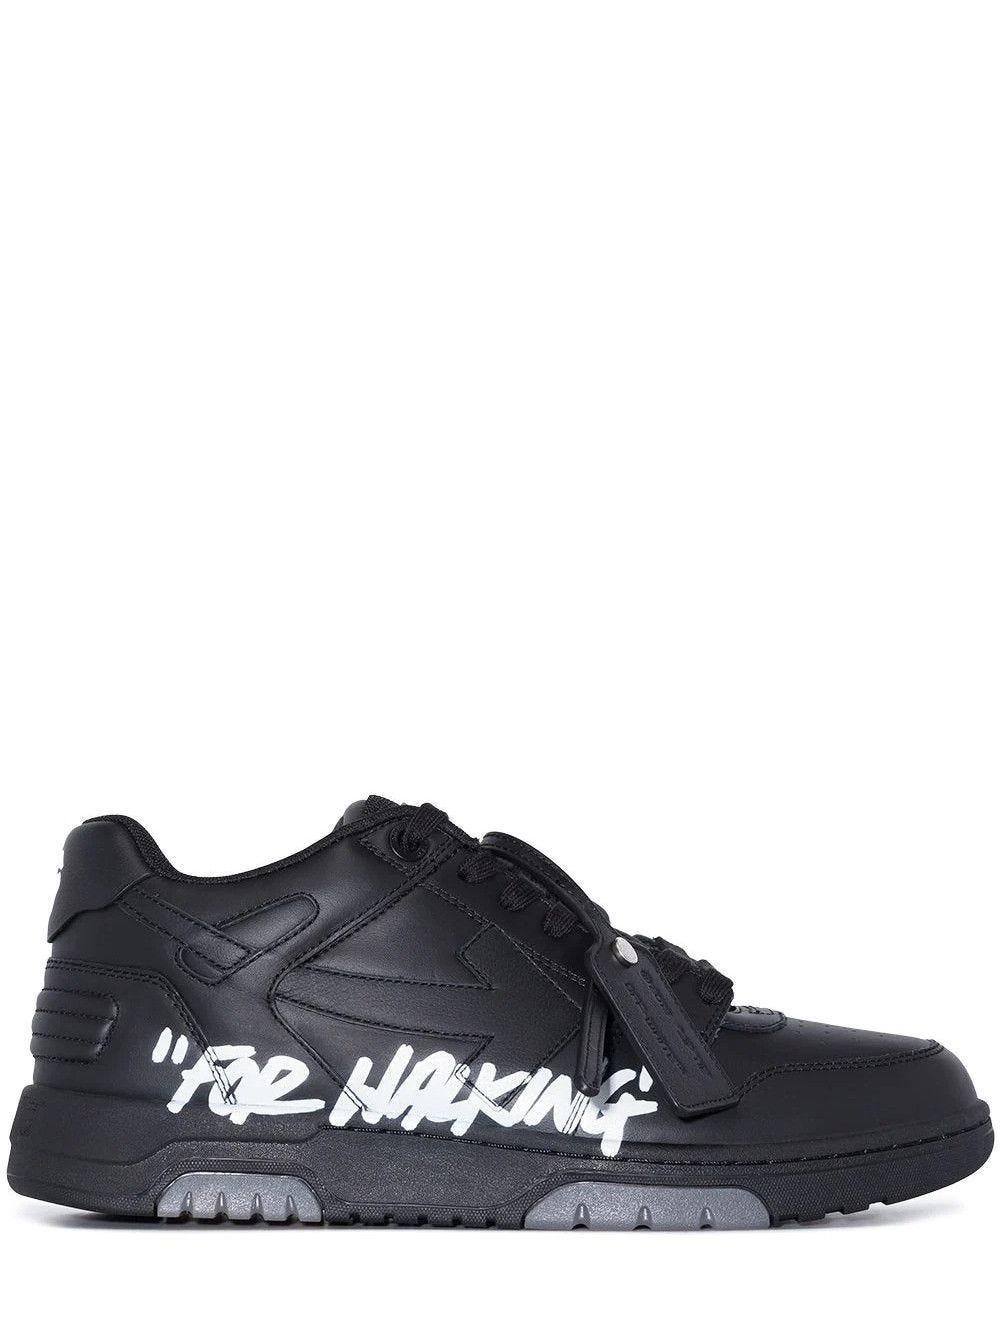 Off-White c/o Virgil Abloh Black Out Of Office Ooo Sneakers for Men | Lyst